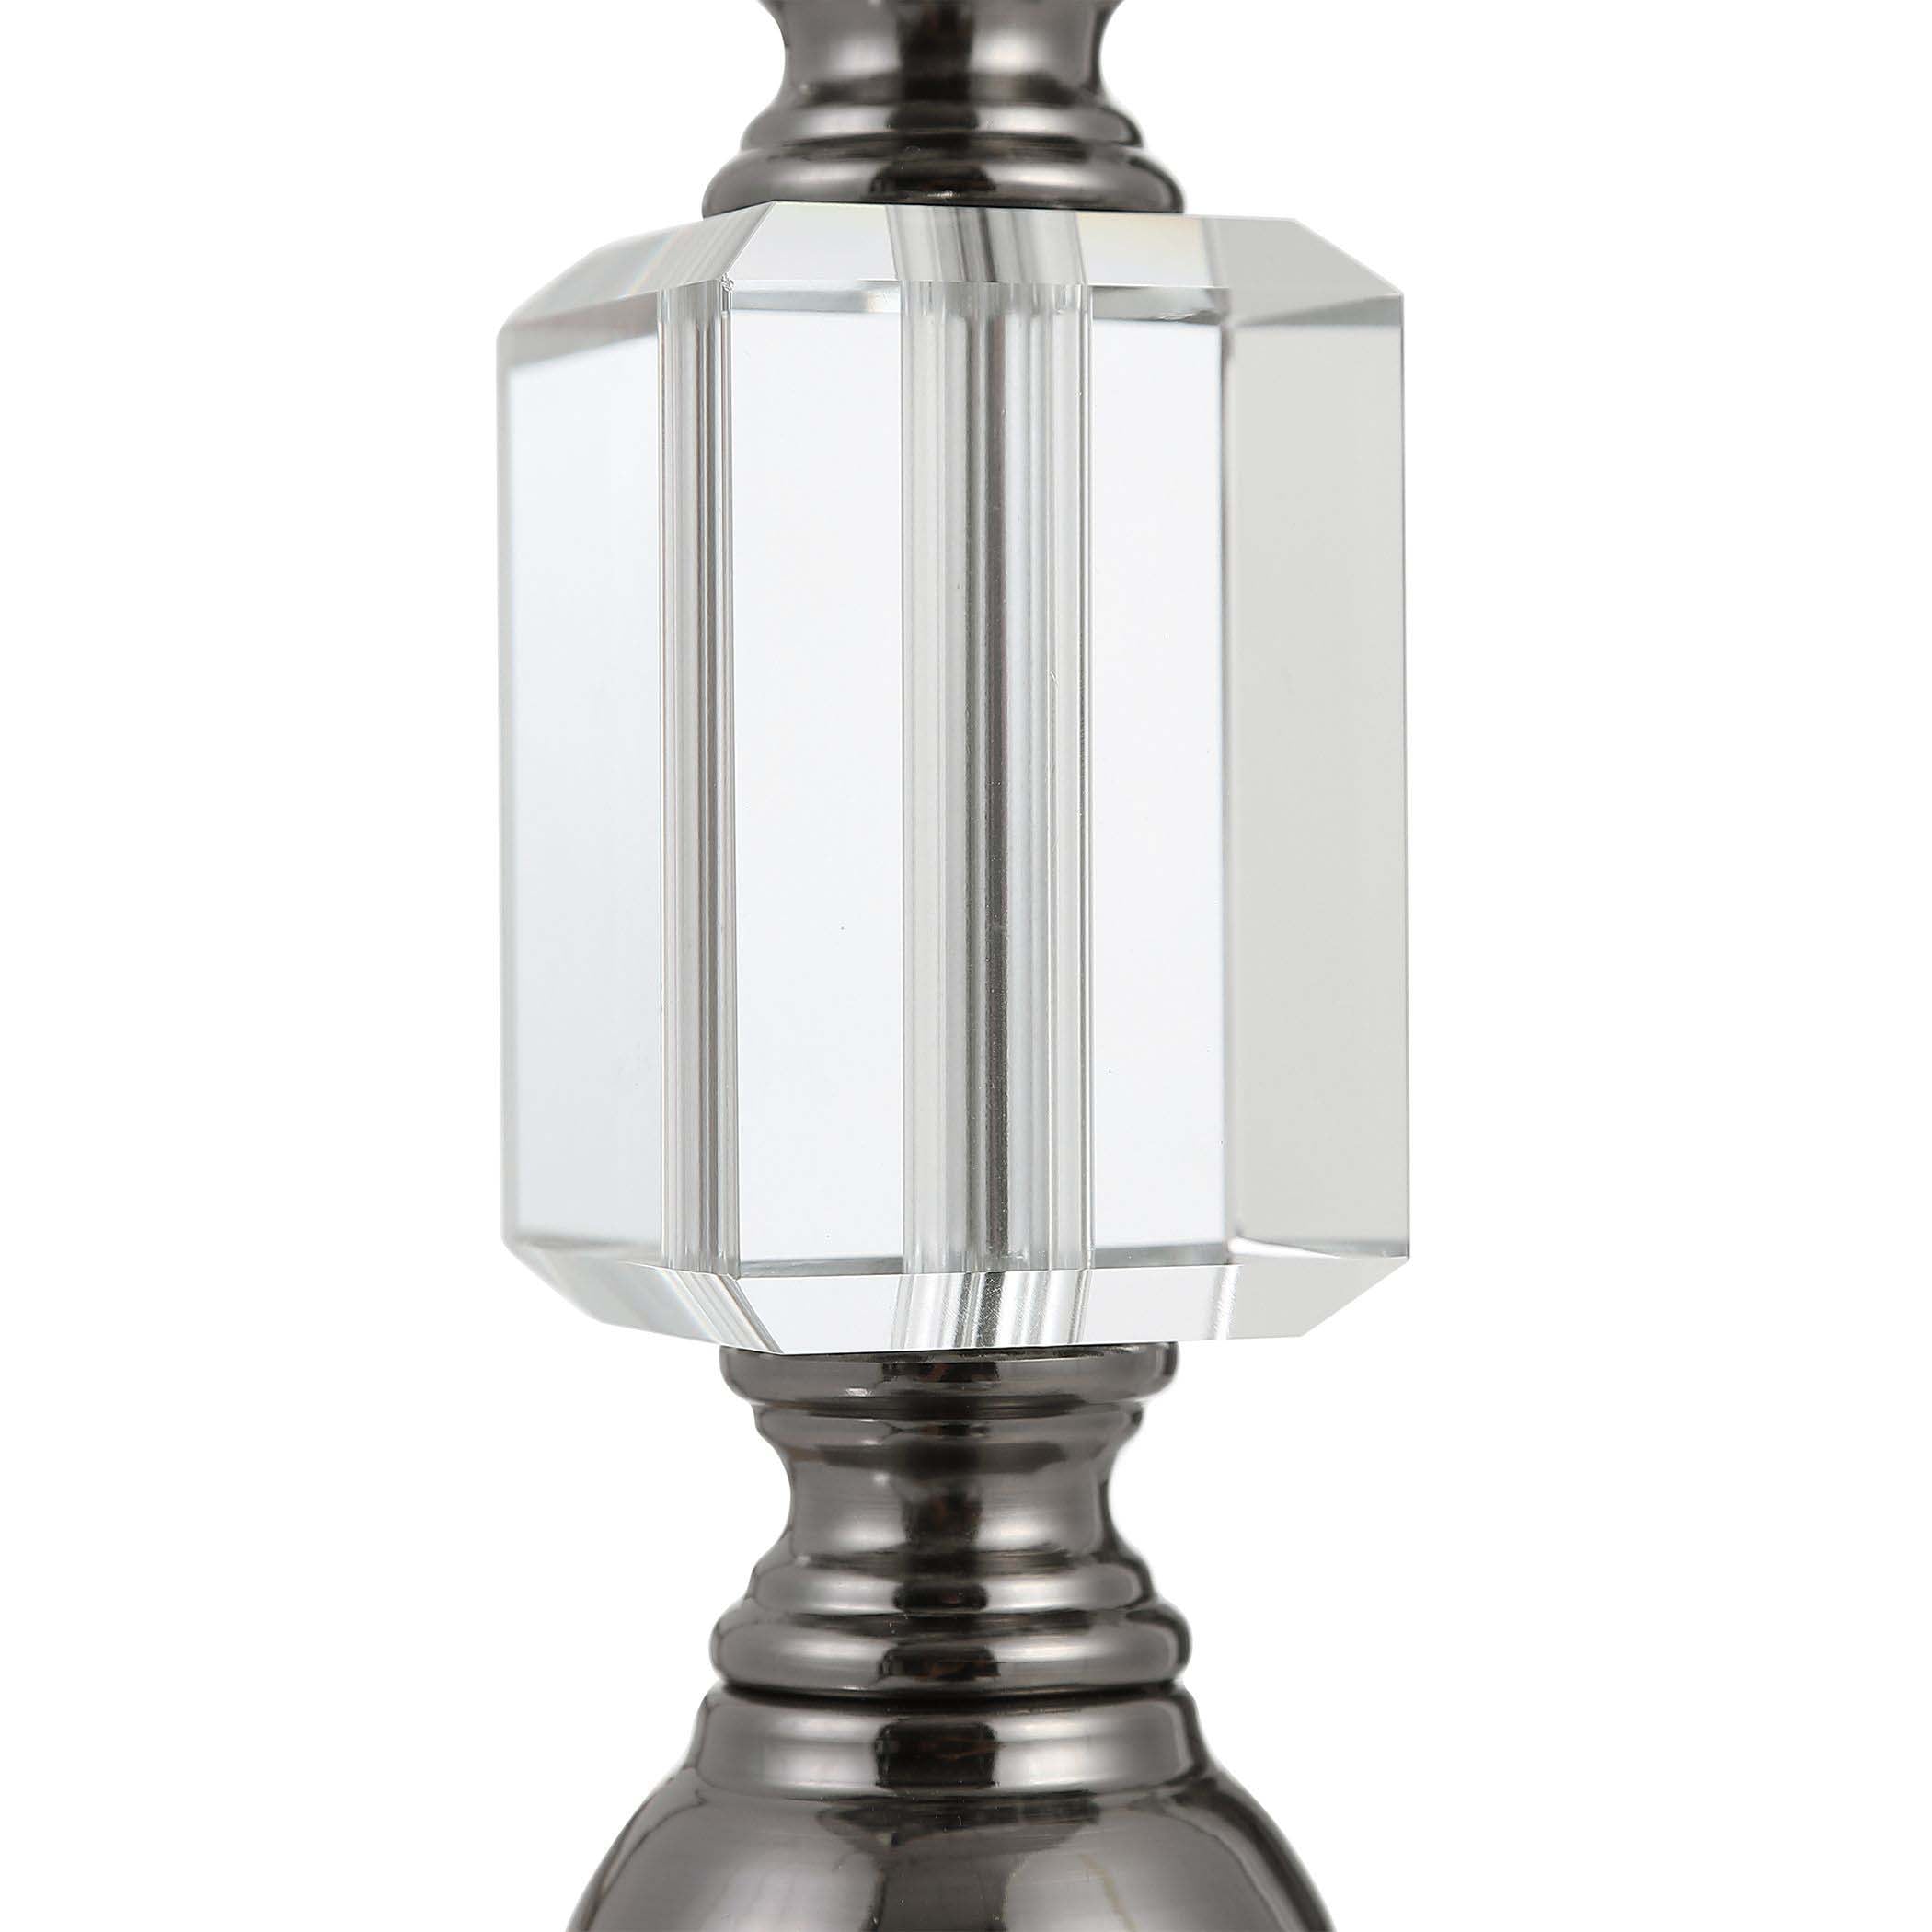 Decor Market Stacked Crystal Separated By Dark Antique Nickel Accents Table Lamp